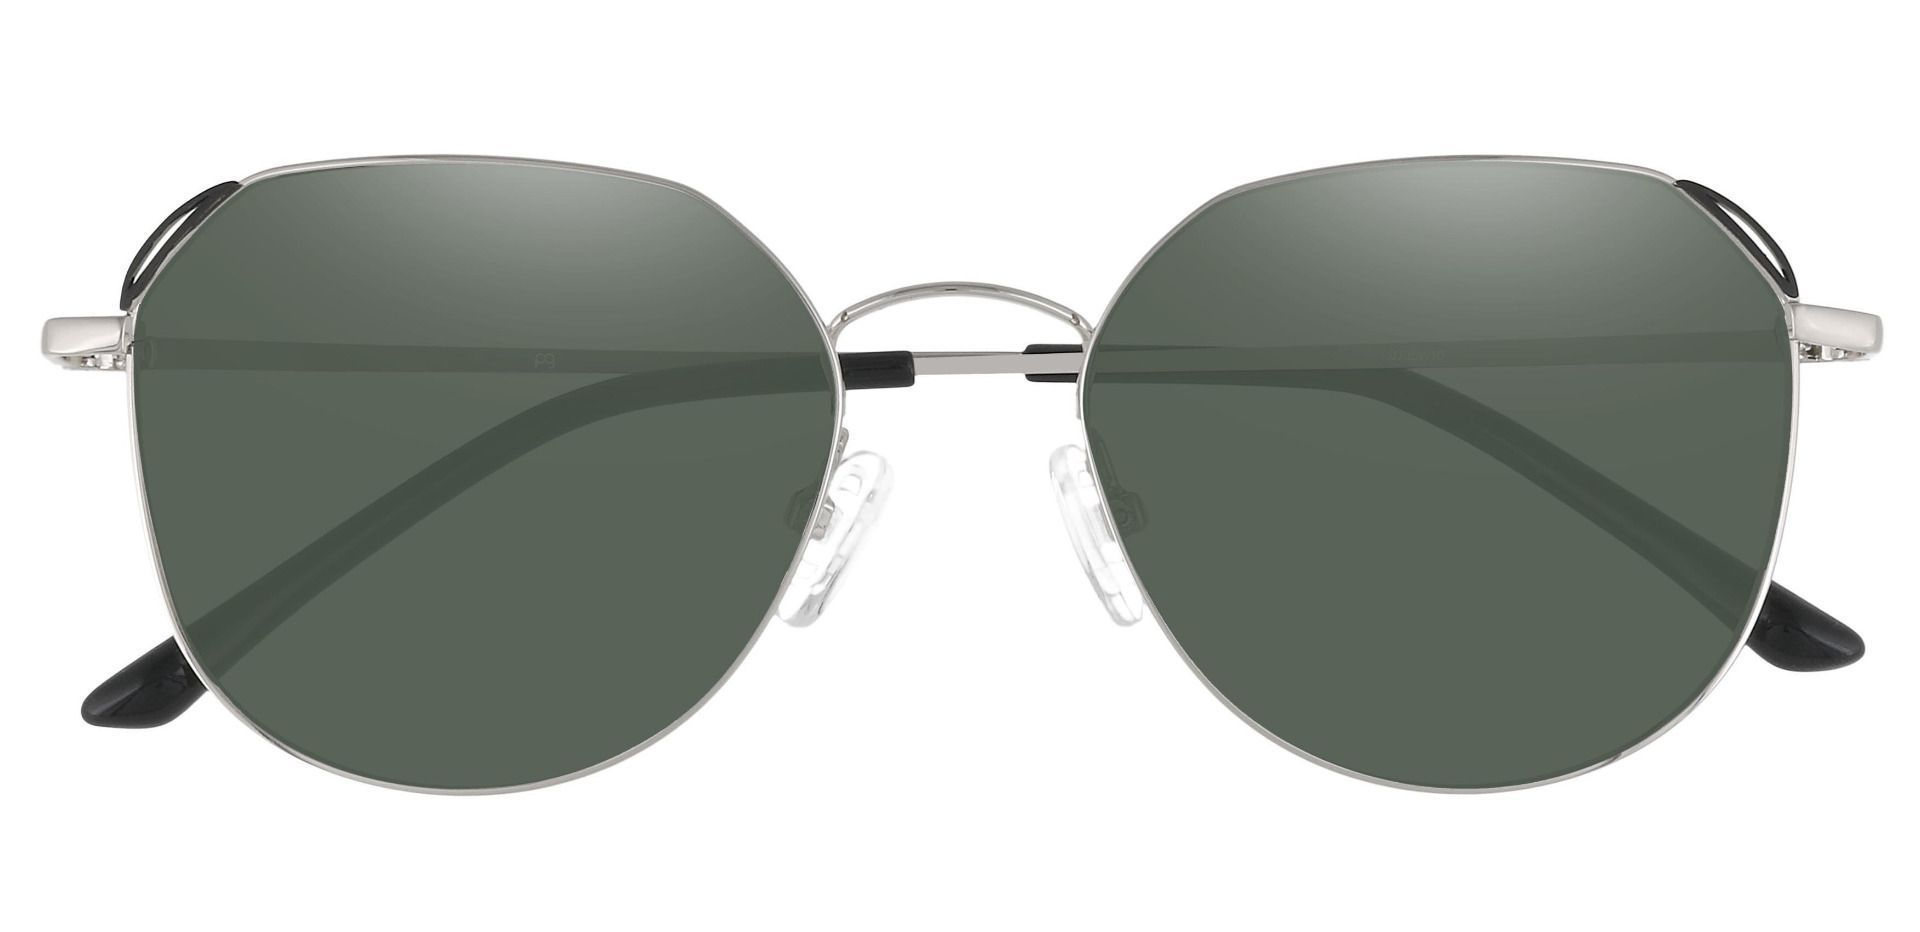 Figaro Geometric Reading Sunglasses - Silver Frame With Green Lenses